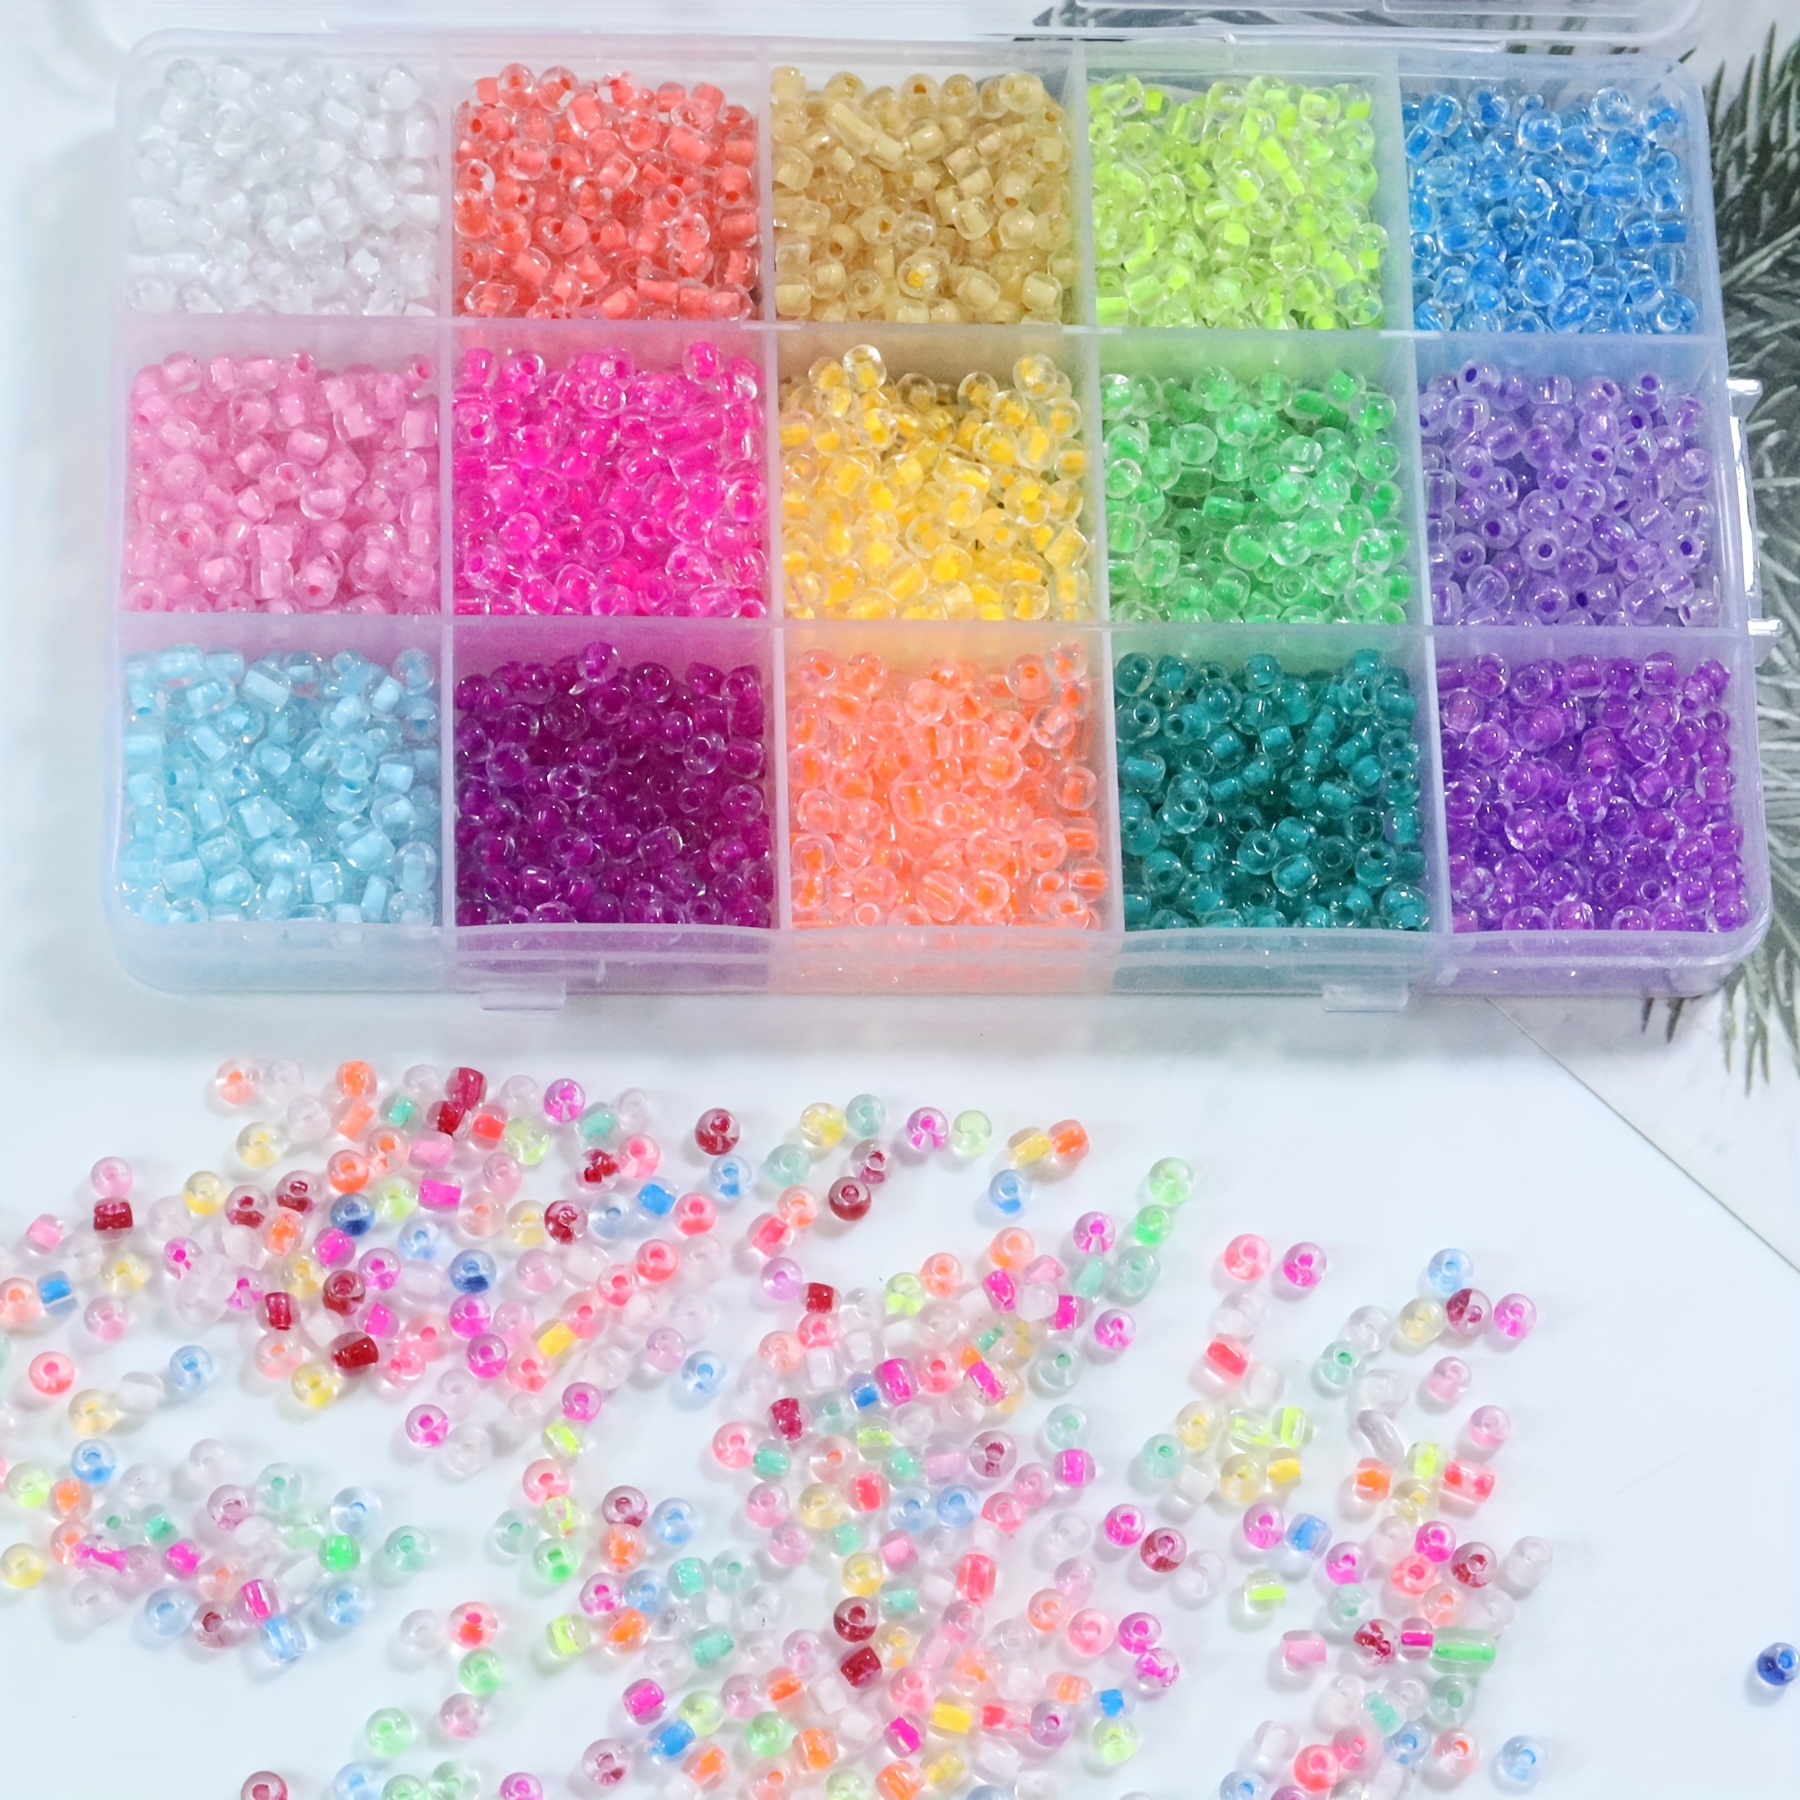 

3000pcs 4mm Colorful Transparent Glass Beads, Diy Jewelry Making